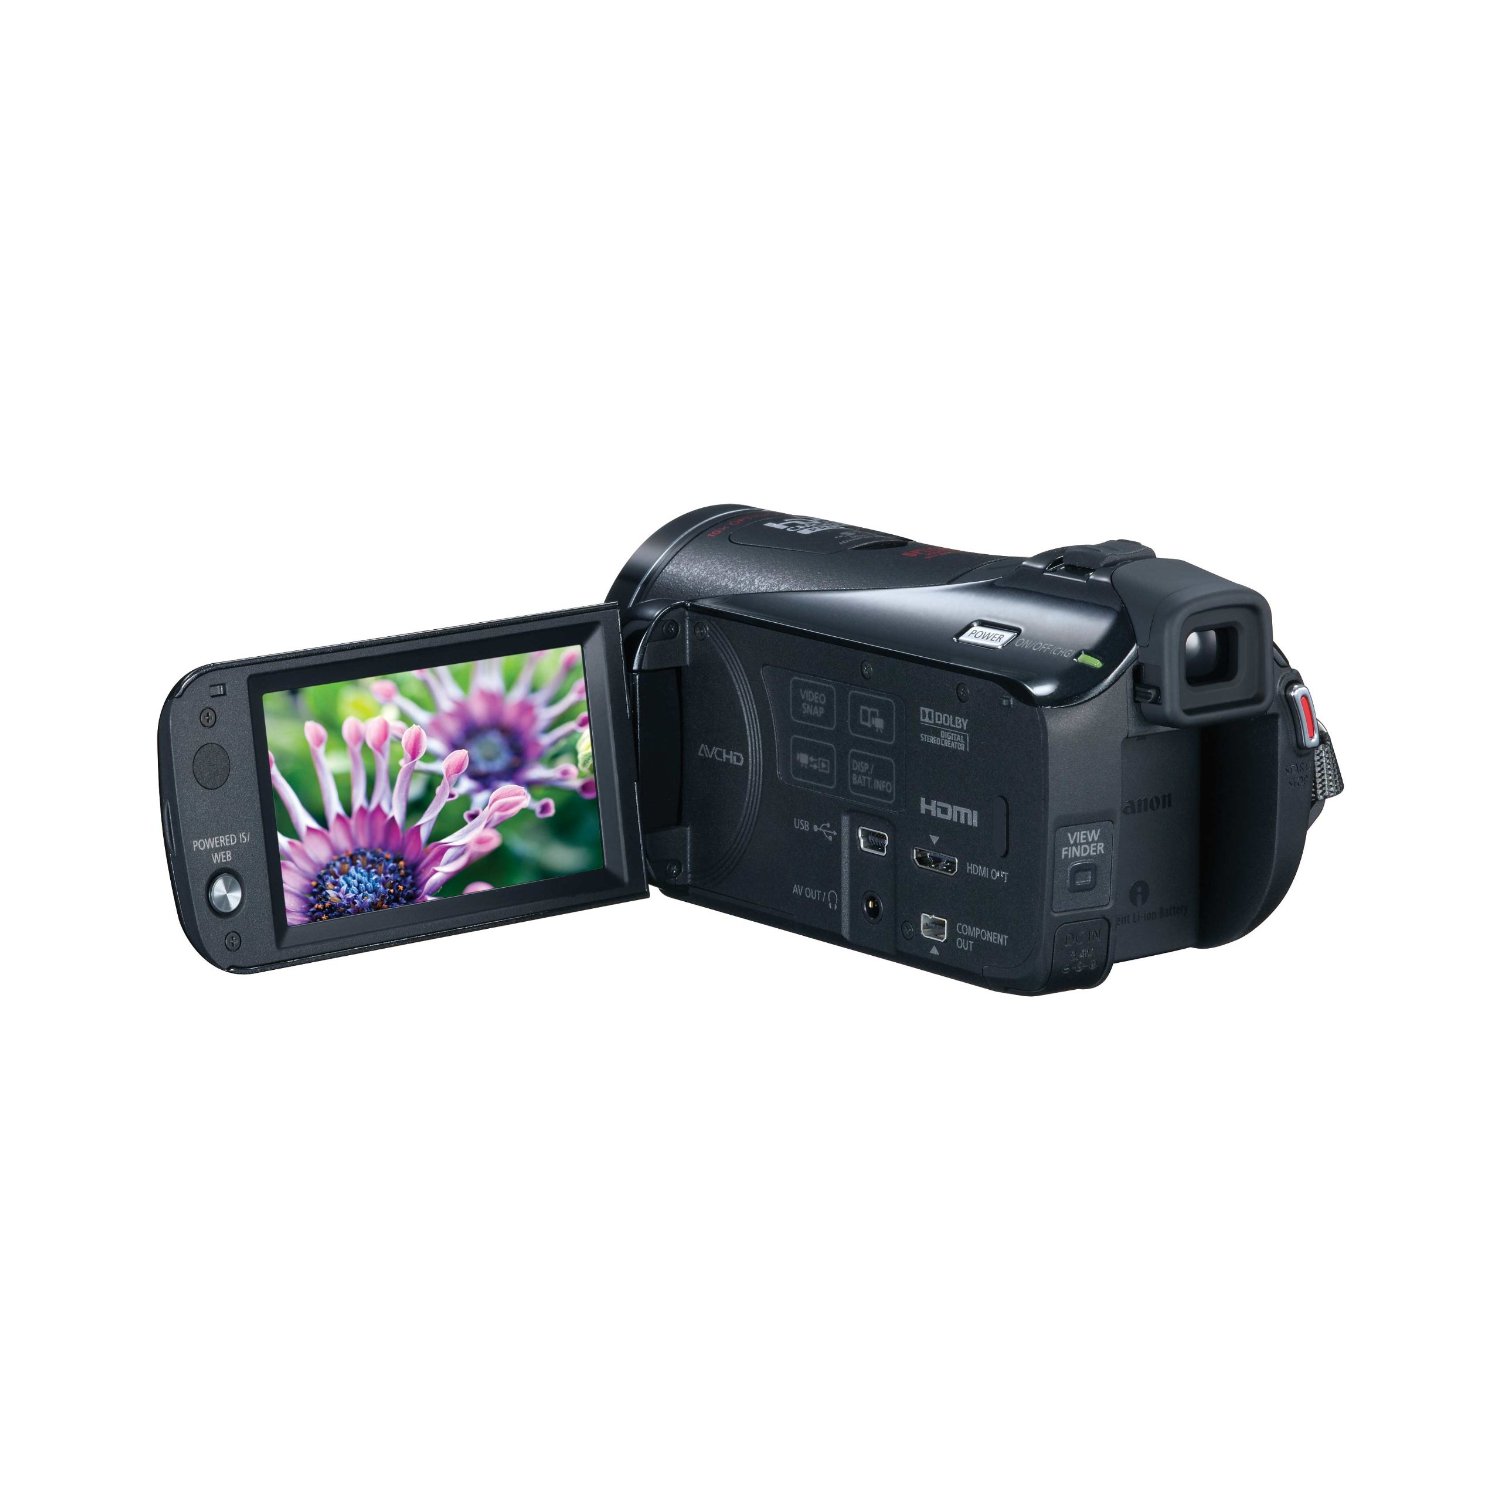 http://thetechjournal.com/wp-content/uploads/images/1112/1323670126-canon-vixia-hf-m41-full-hd-camcorder-with-hd-cmos--34.jpg